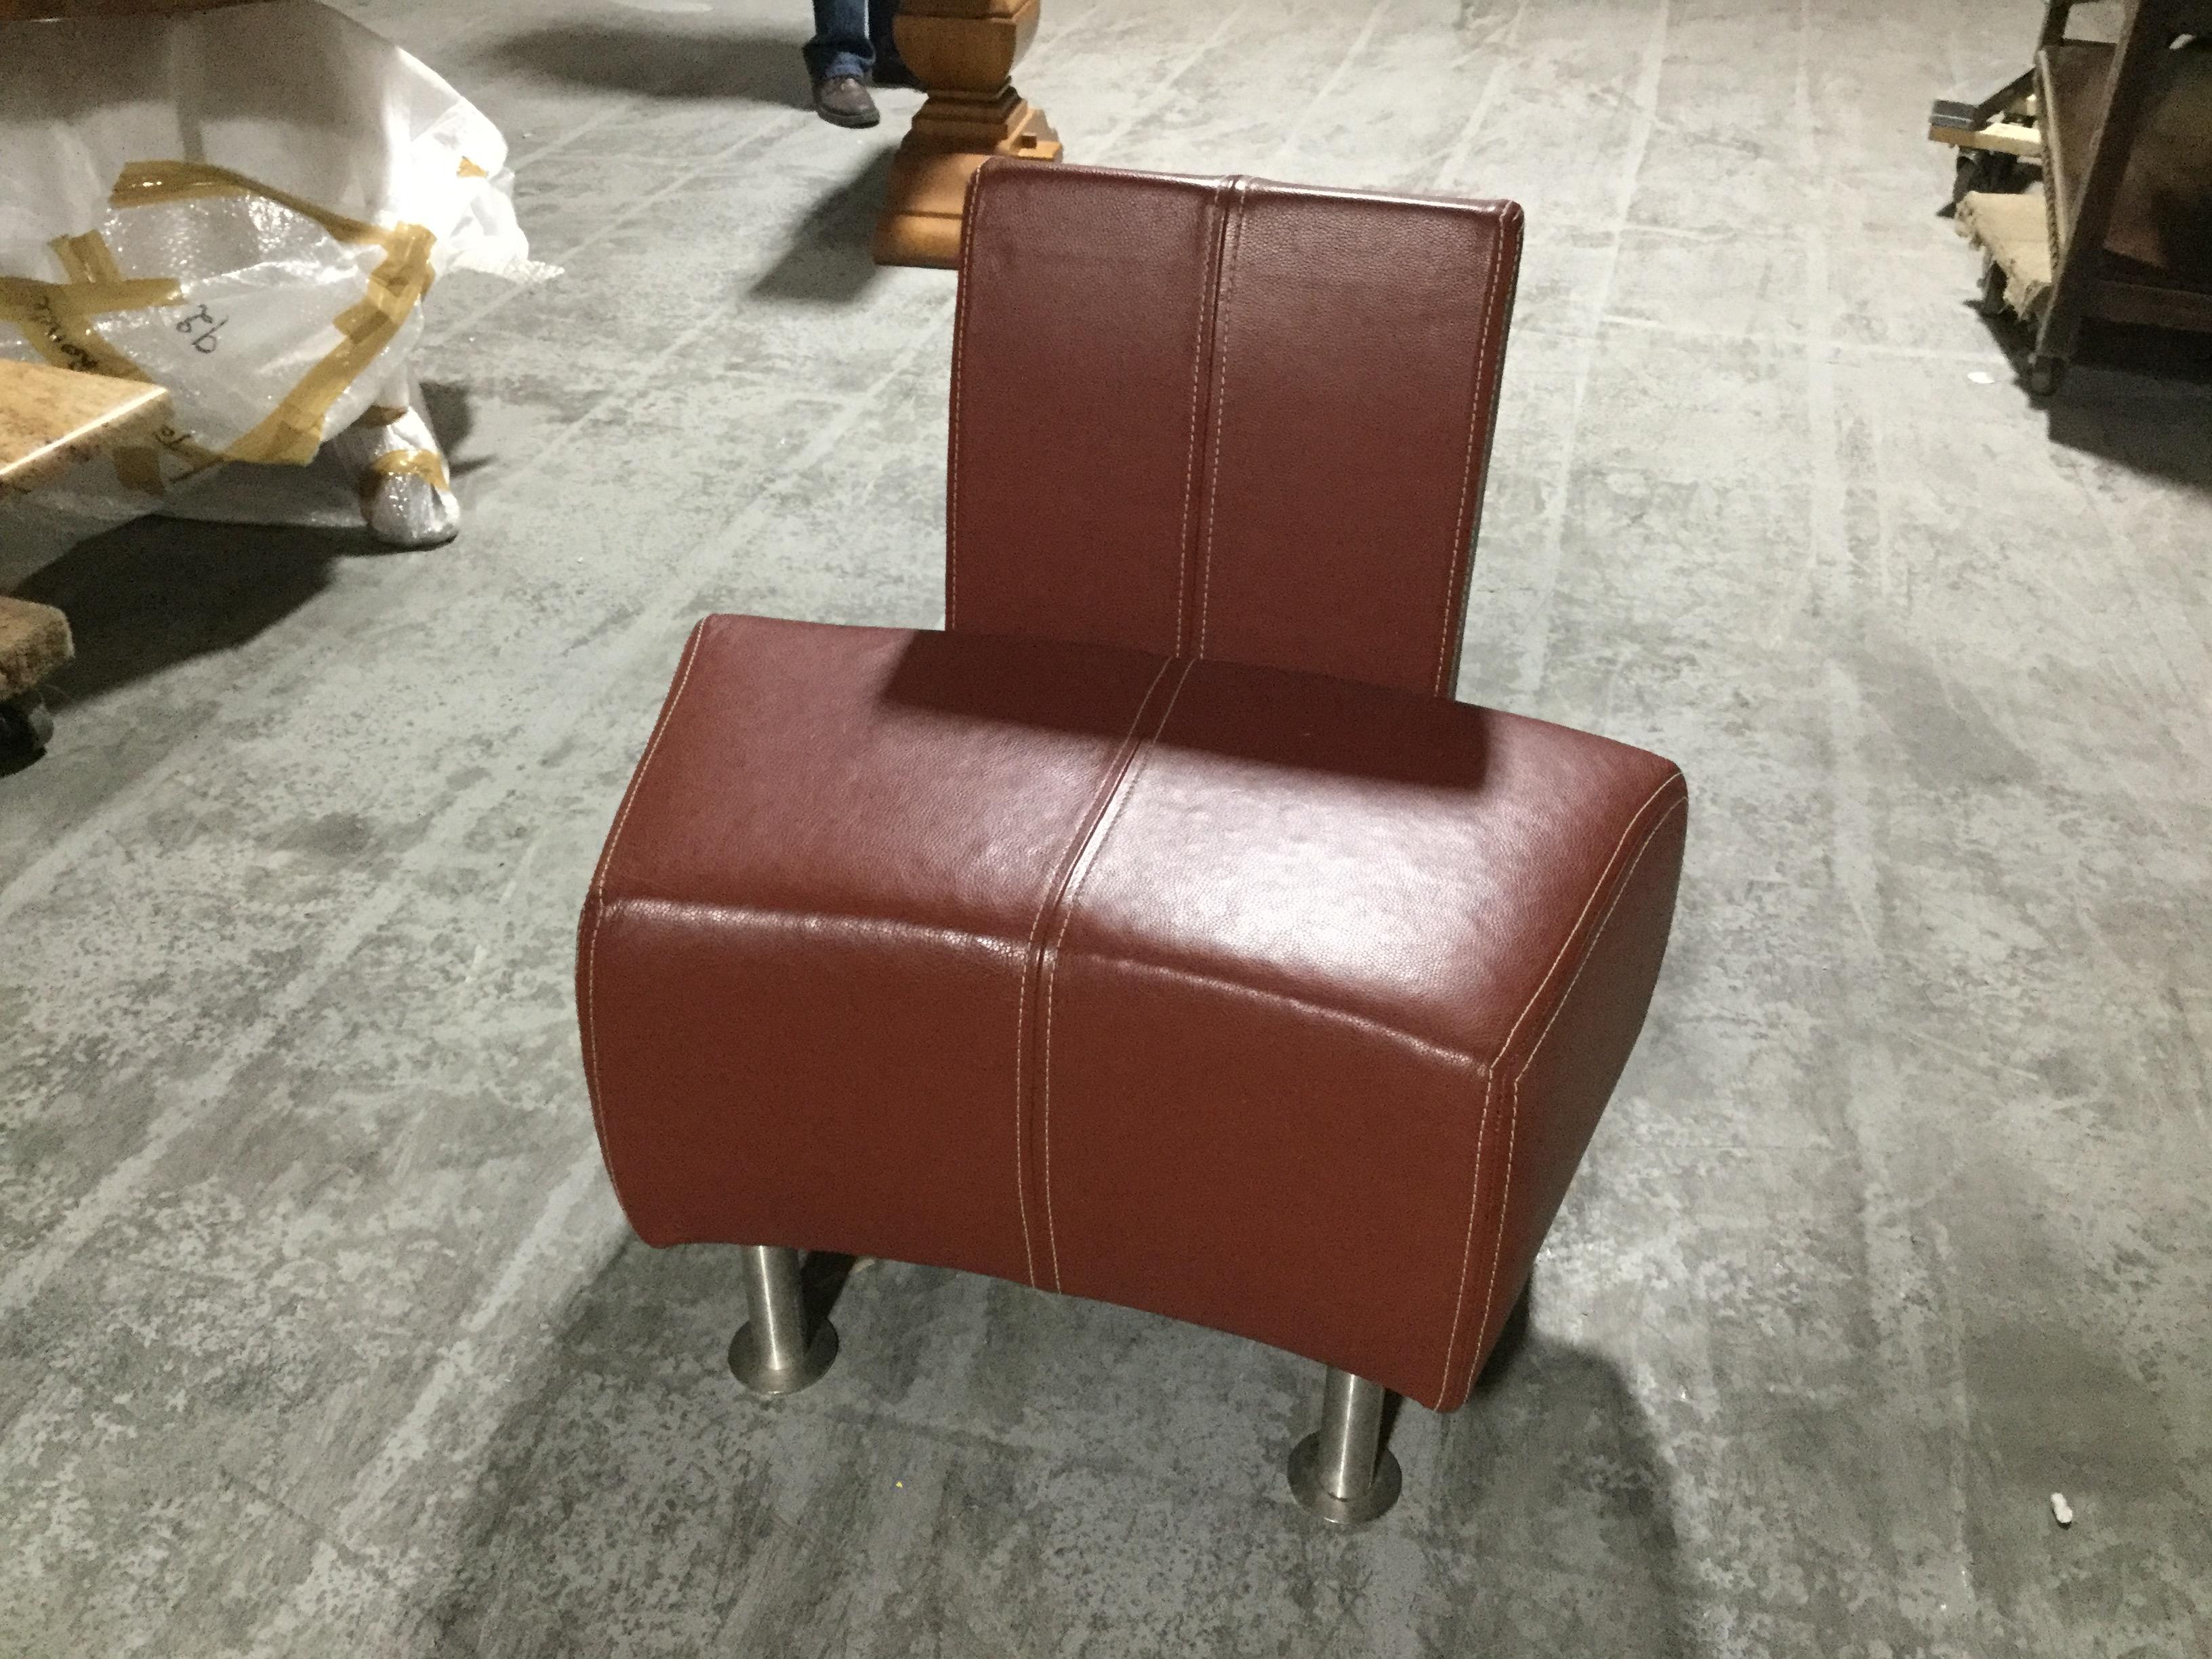 Exceptional Italian Industrial-style Leather salon set. This set includes a curved love seat and 2 side chairs. Made of ox-blood leather cowhide, each piece has detailed white top-stitching on the leather upholstery, and chrome industrial legs. The